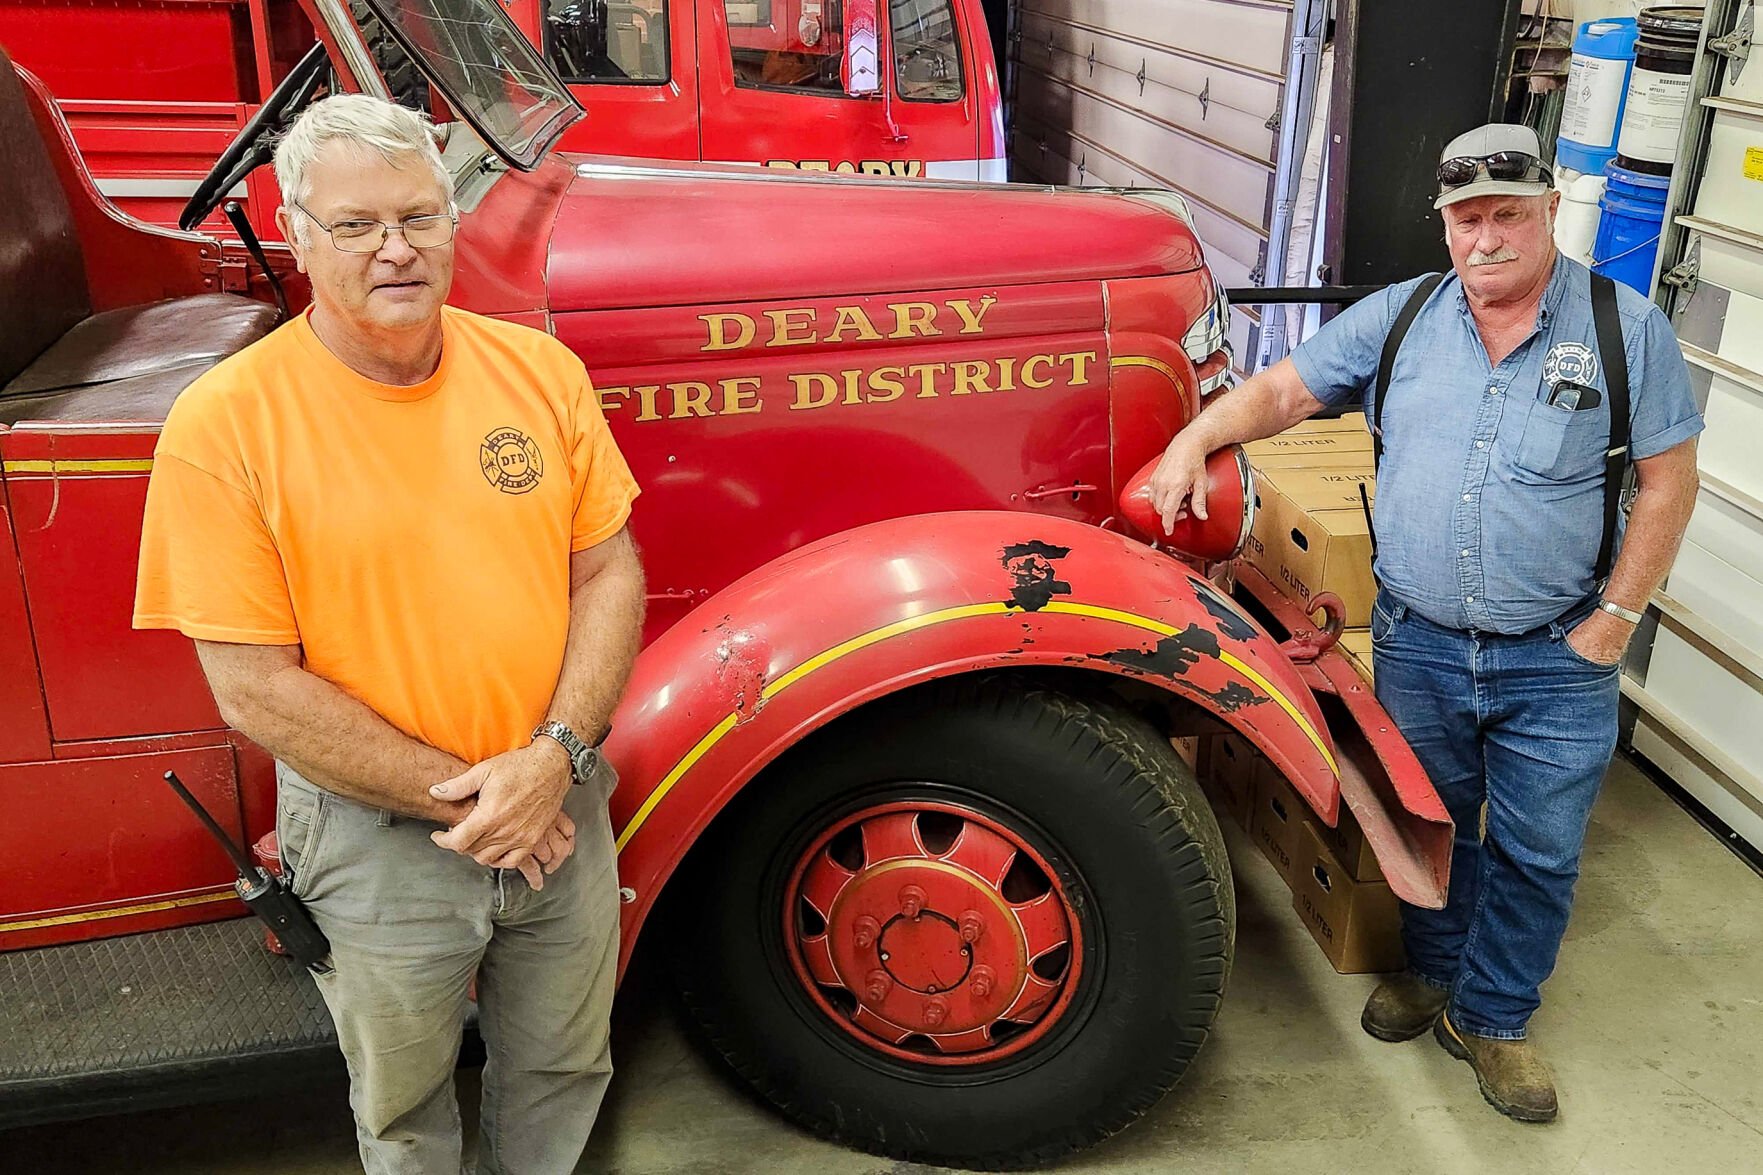 Deary firefighters mark 50 years in the business Local and regional news Lewiston Tribune lmtribune